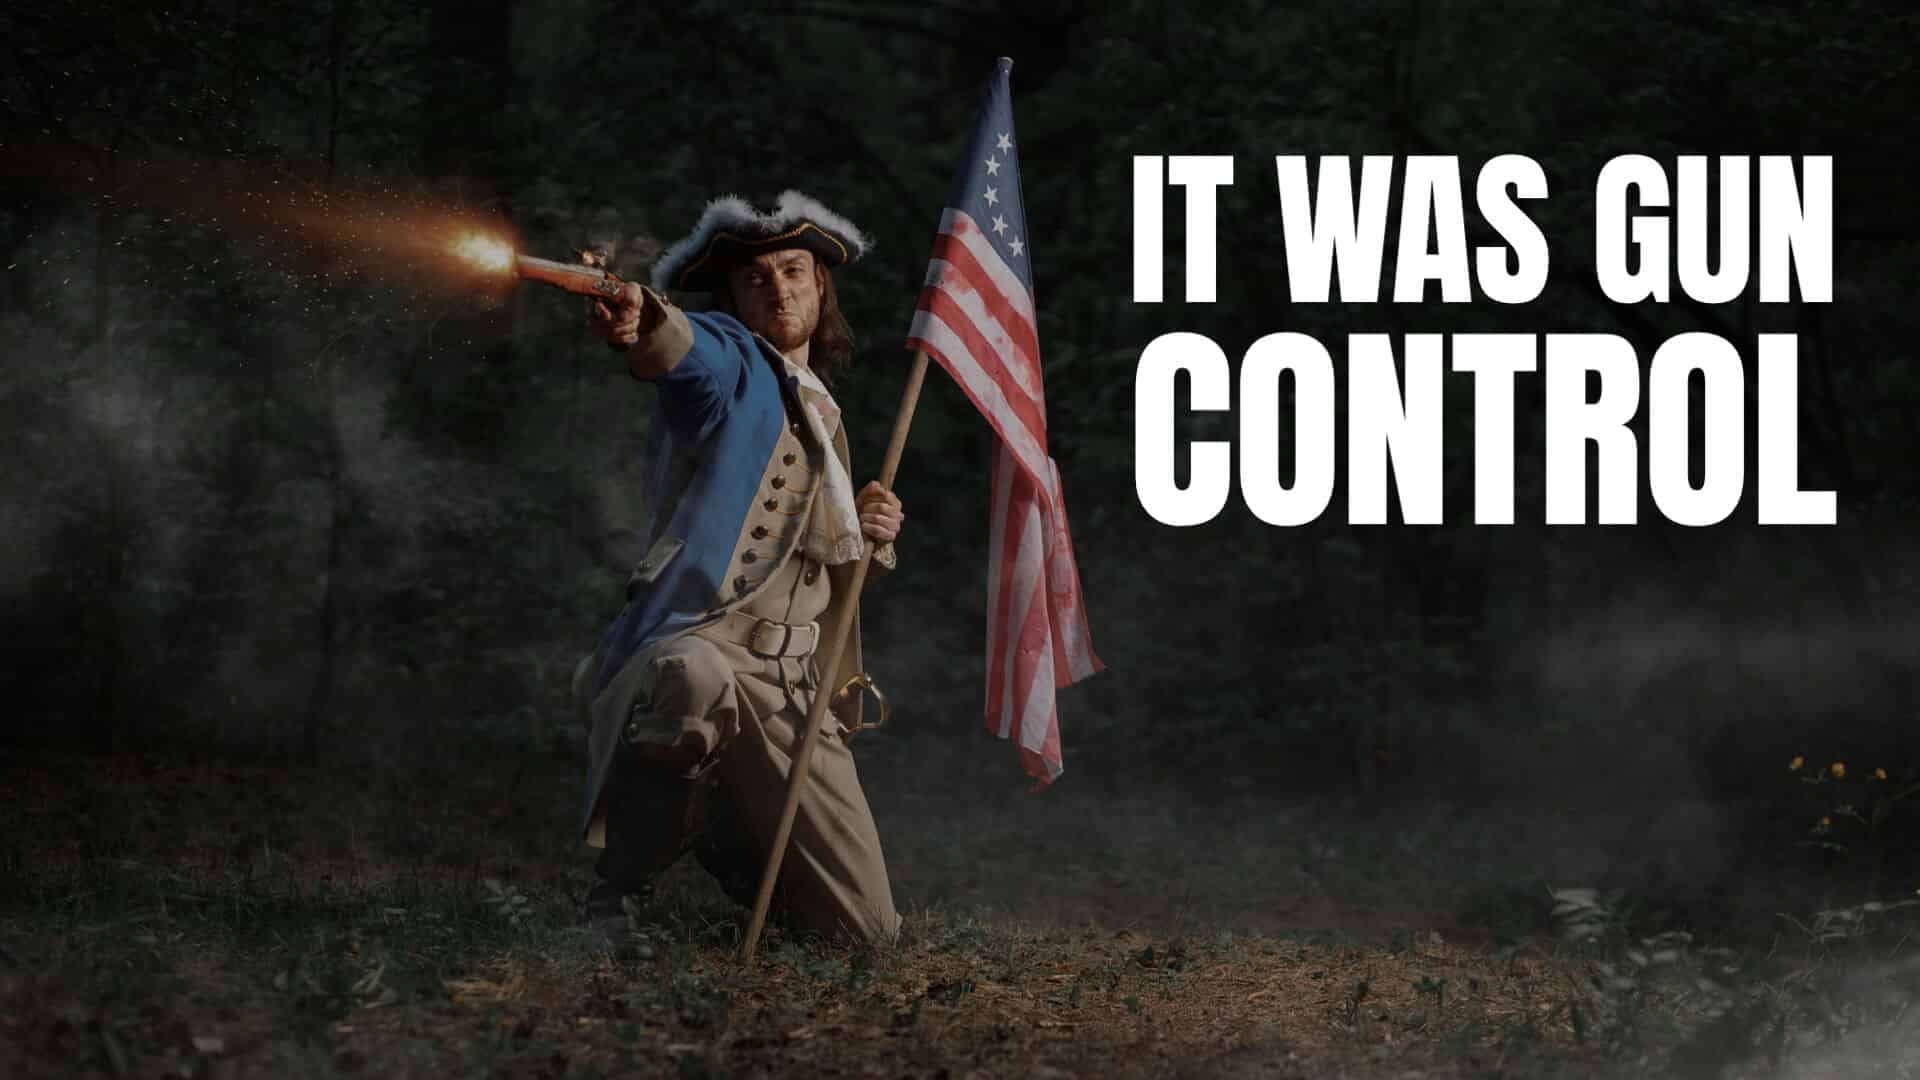 It Was Gun Control: What Started the War for Independence